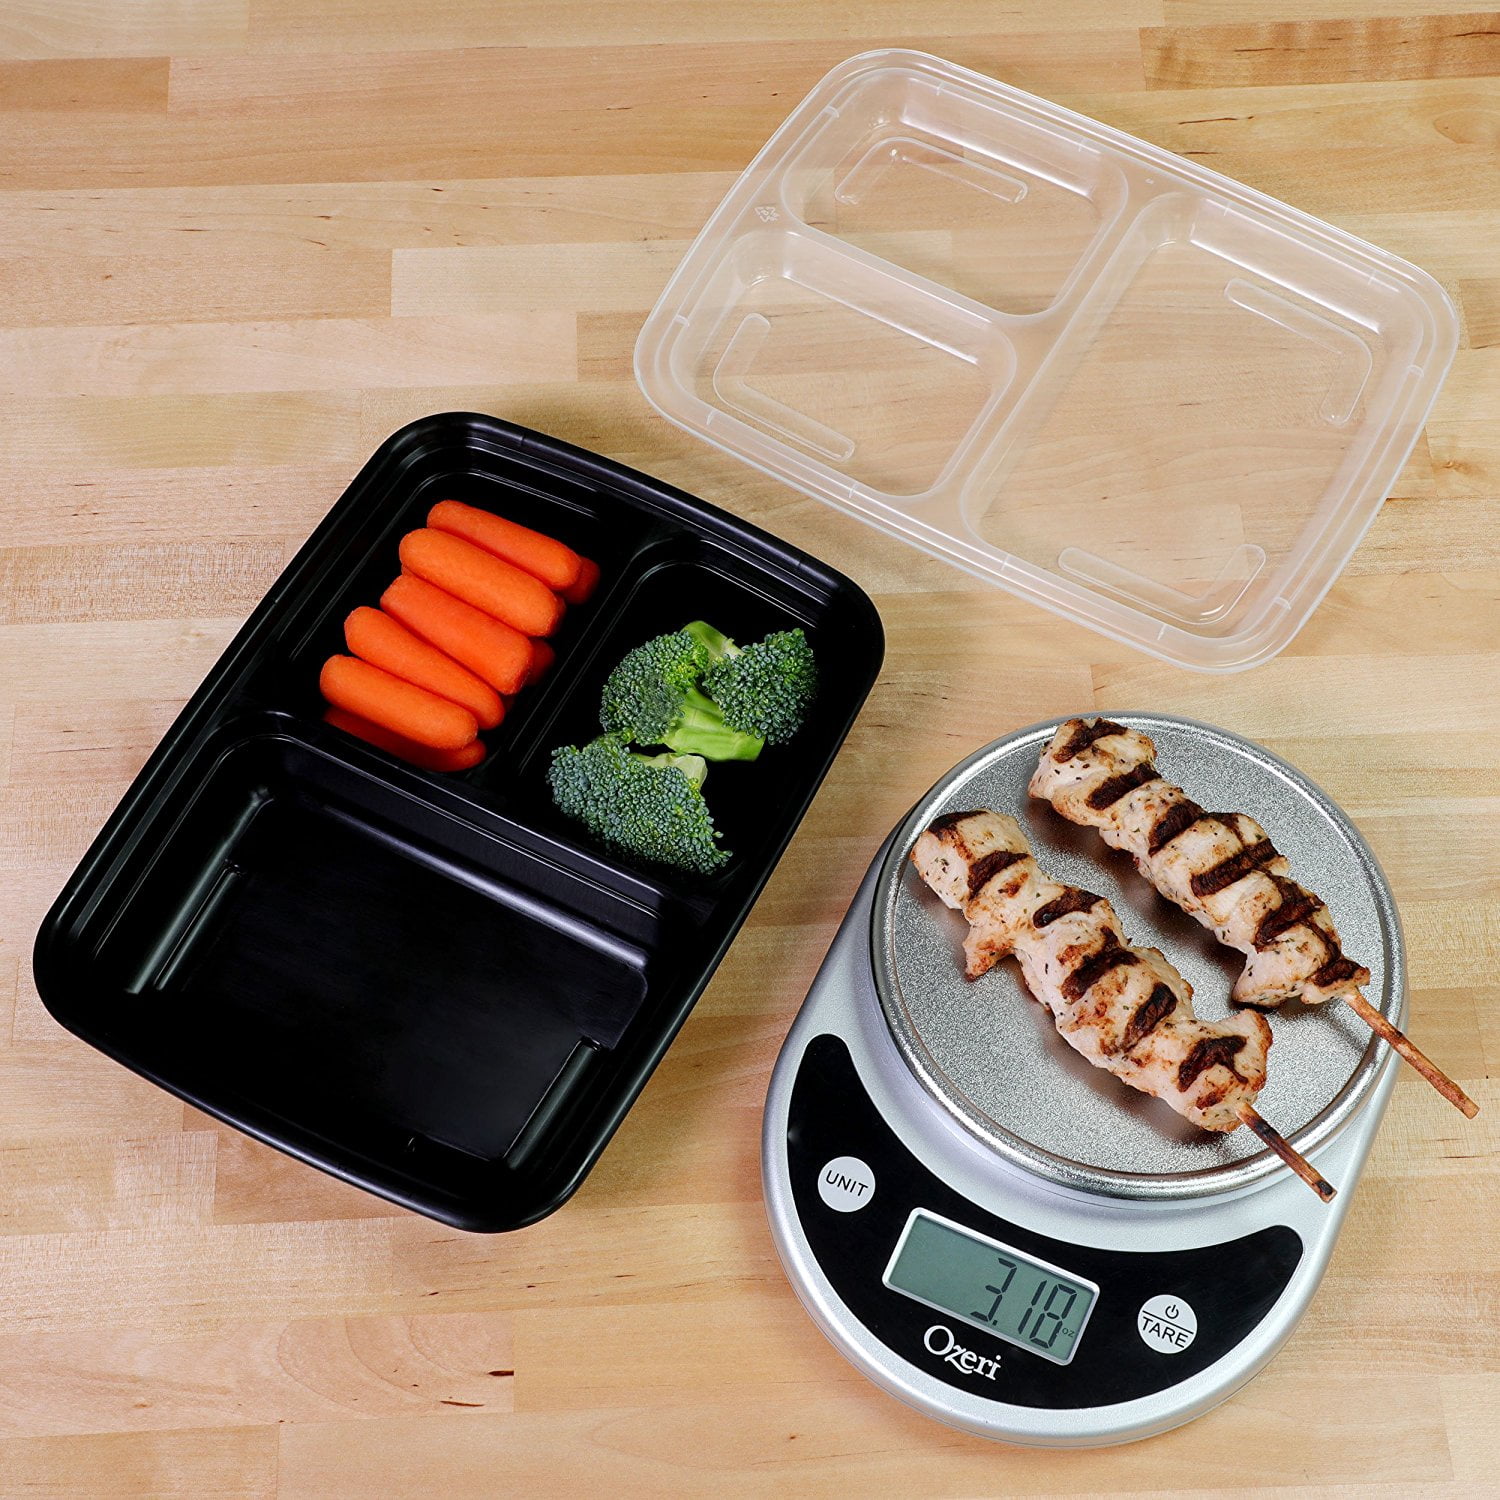  Freshware Meal Prep Containers [25 Pack] 3 Compartment with  Lids, Food Storage Containers, Bento Box, Stackable, Microwave/Dishwasher  Safe (32 oz): Home & Kitchen